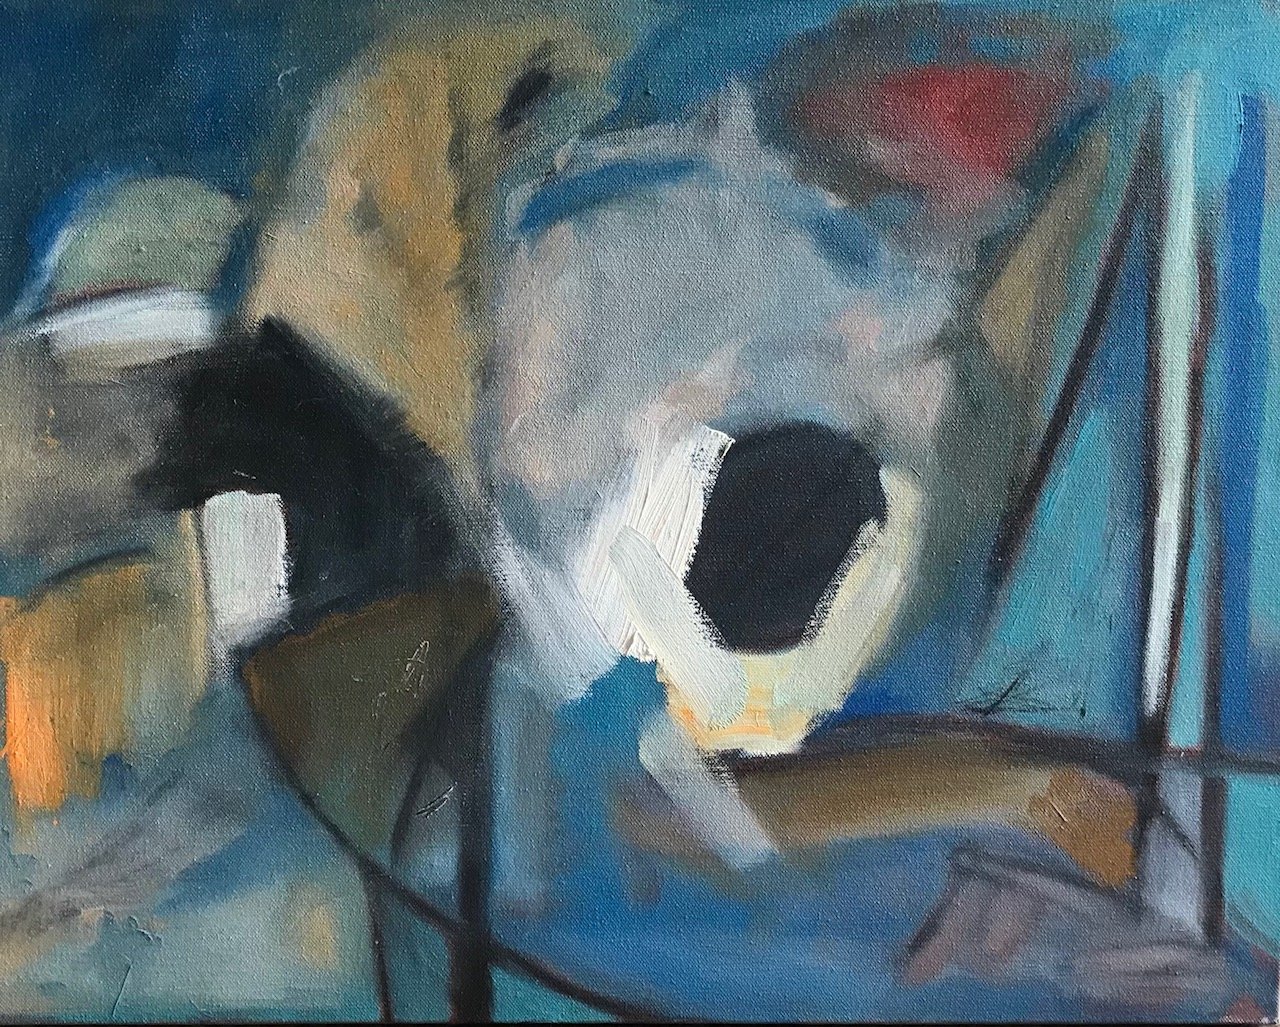    Abstract 2  - oil on canvas, 24-inches x 22-inches  